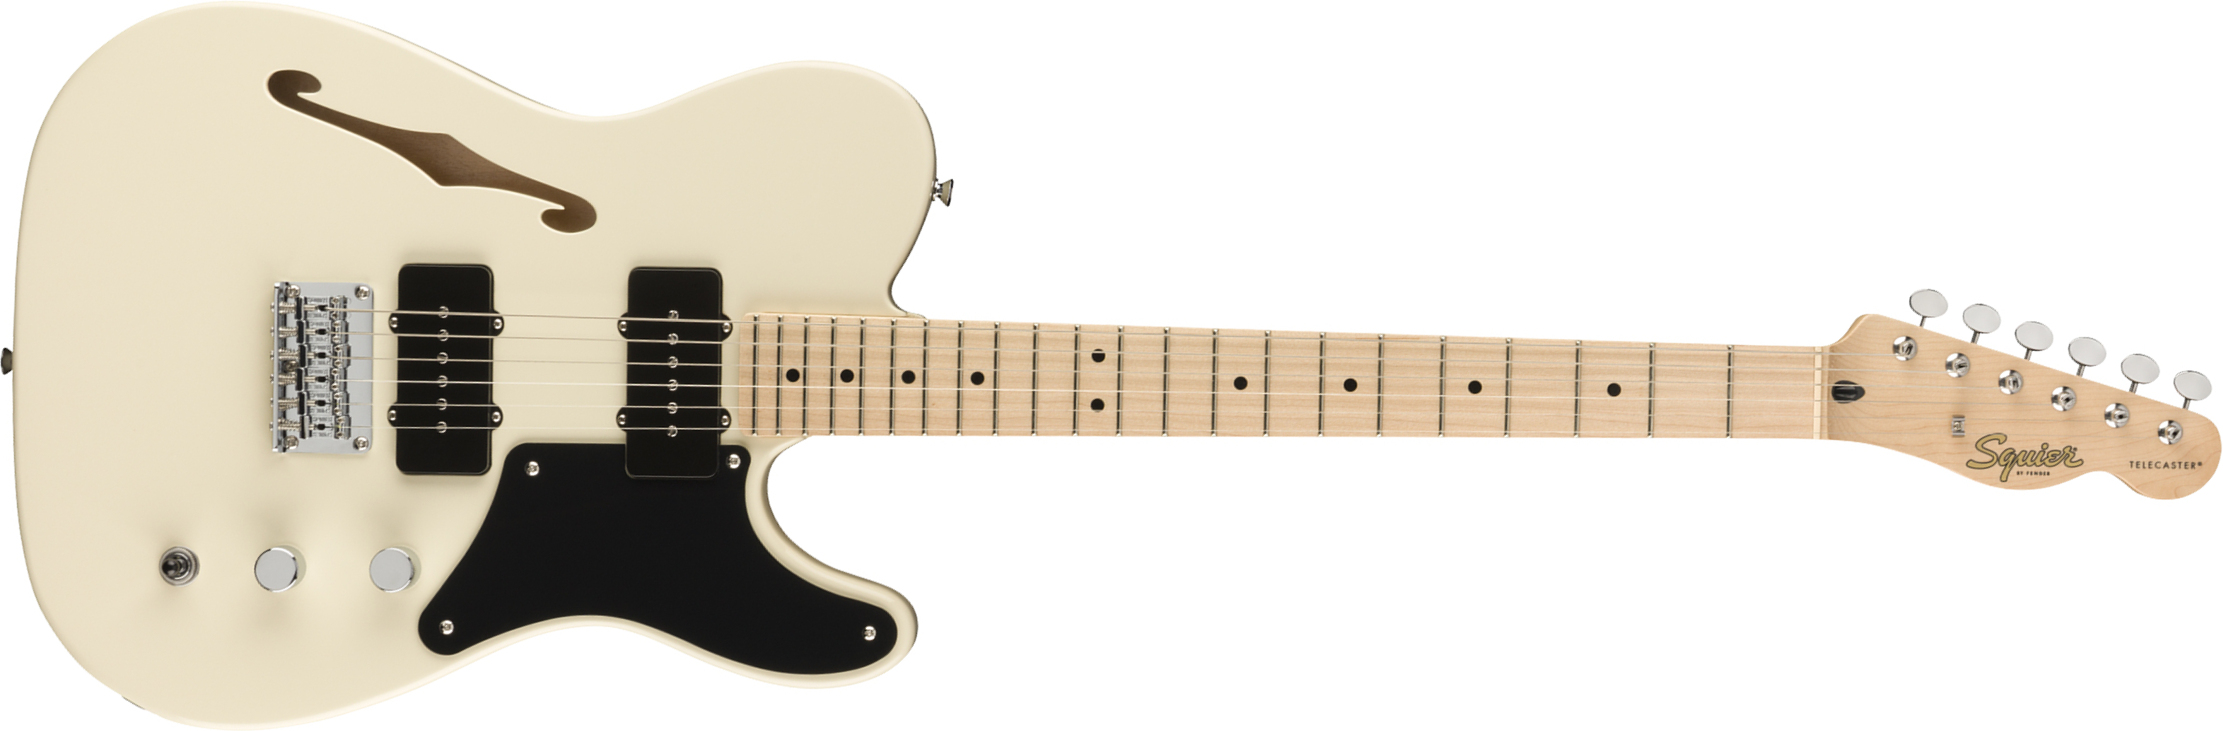 Squier Tele Thinline Cabronita Paranormal Ss Ht Mn - Olympic White - E-Gitarre in Teleform - Main picture